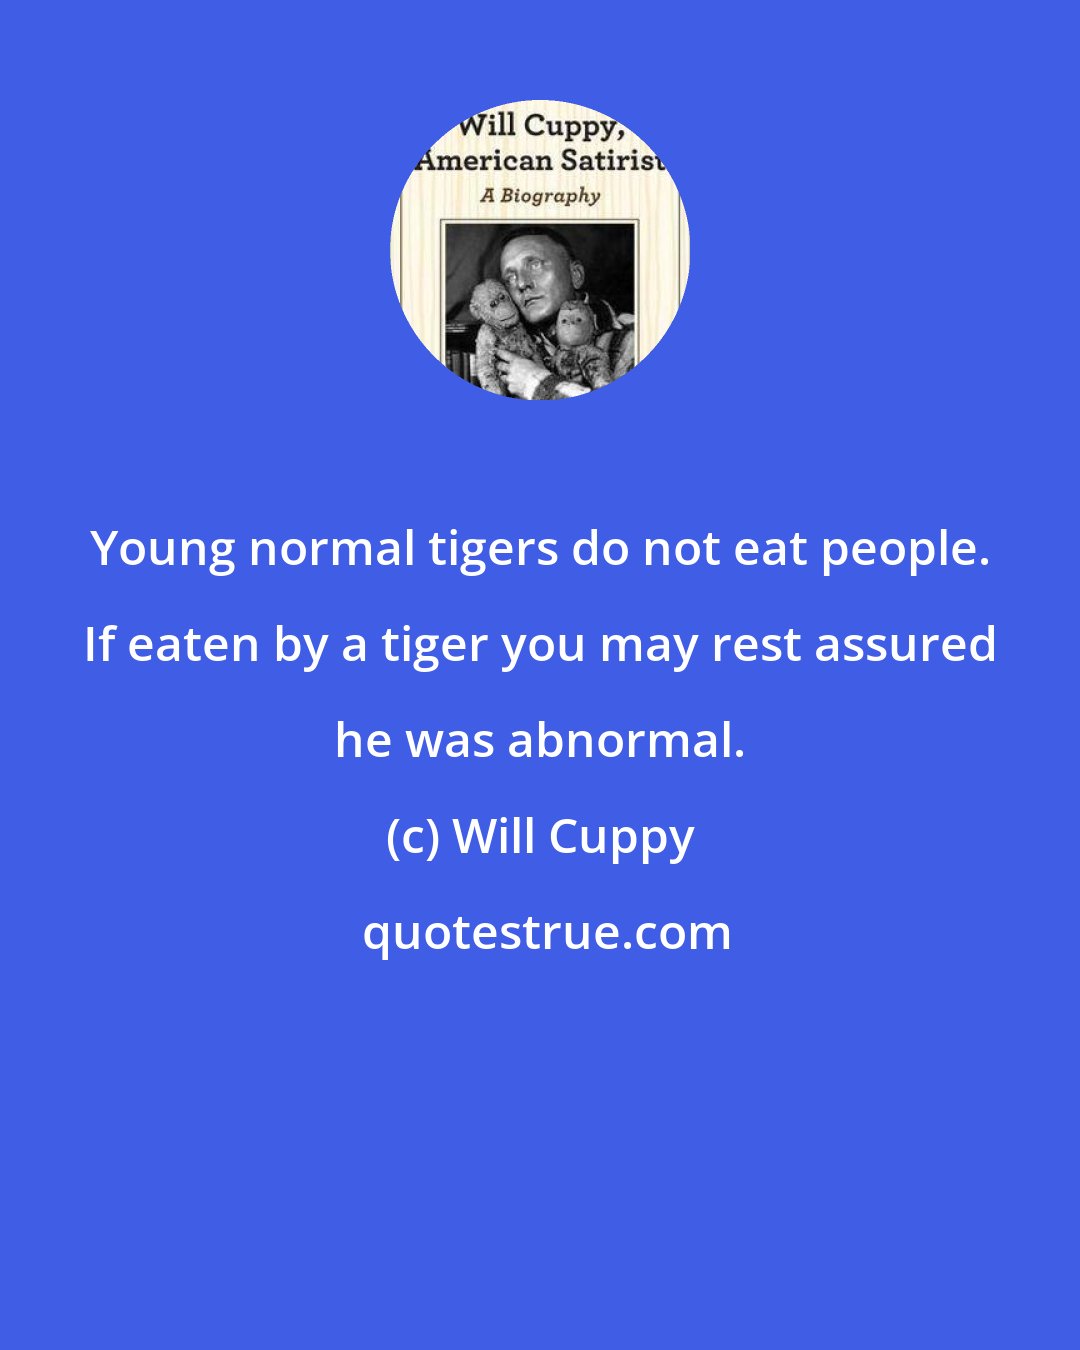 Will Cuppy: Young normal tigers do not eat people. If eaten by a tiger you may rest assured he was abnormal.